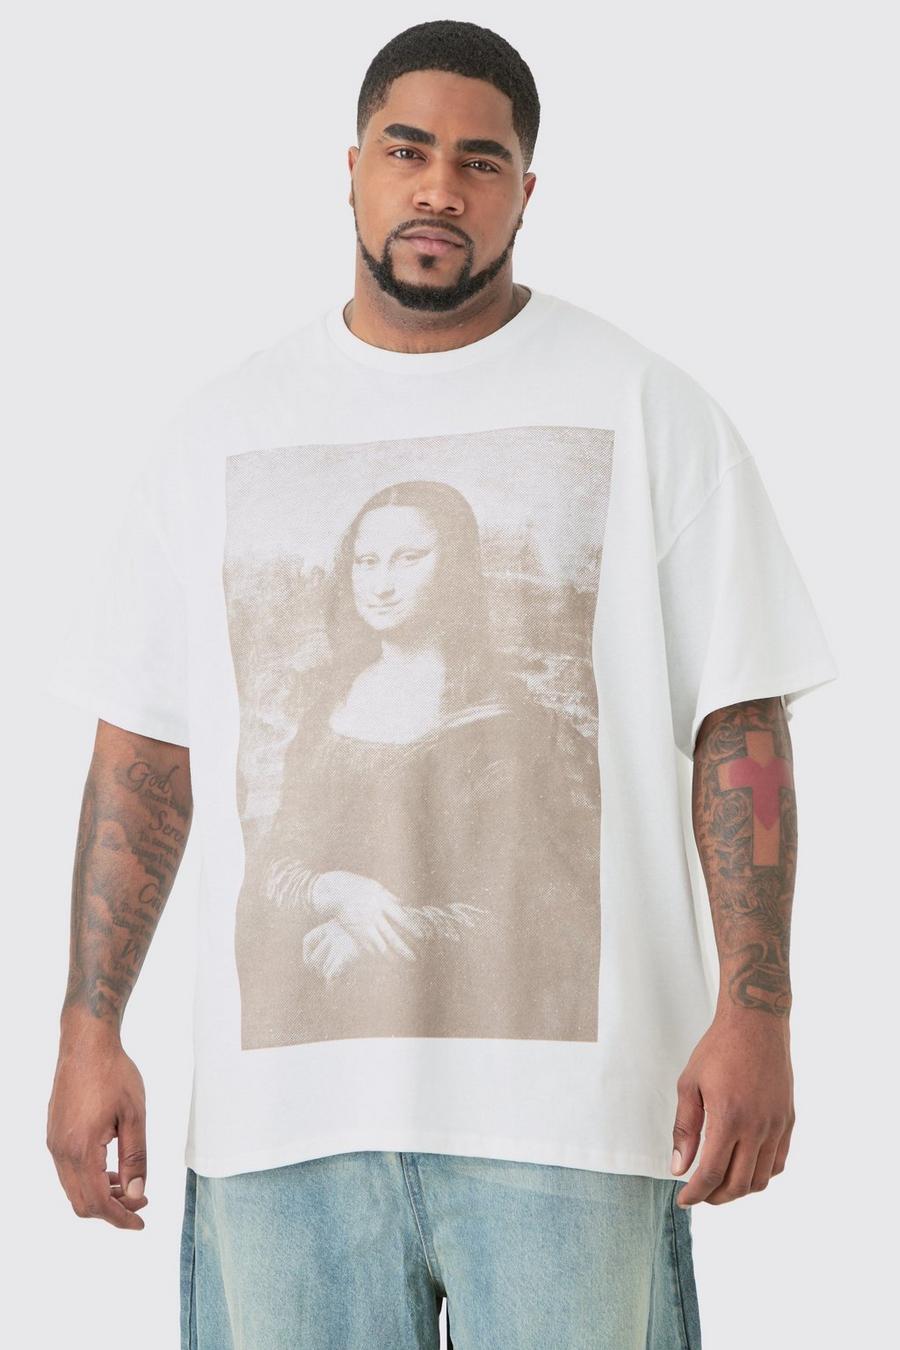 Plus Mona Lisa Licence T-shirt In White image number 1